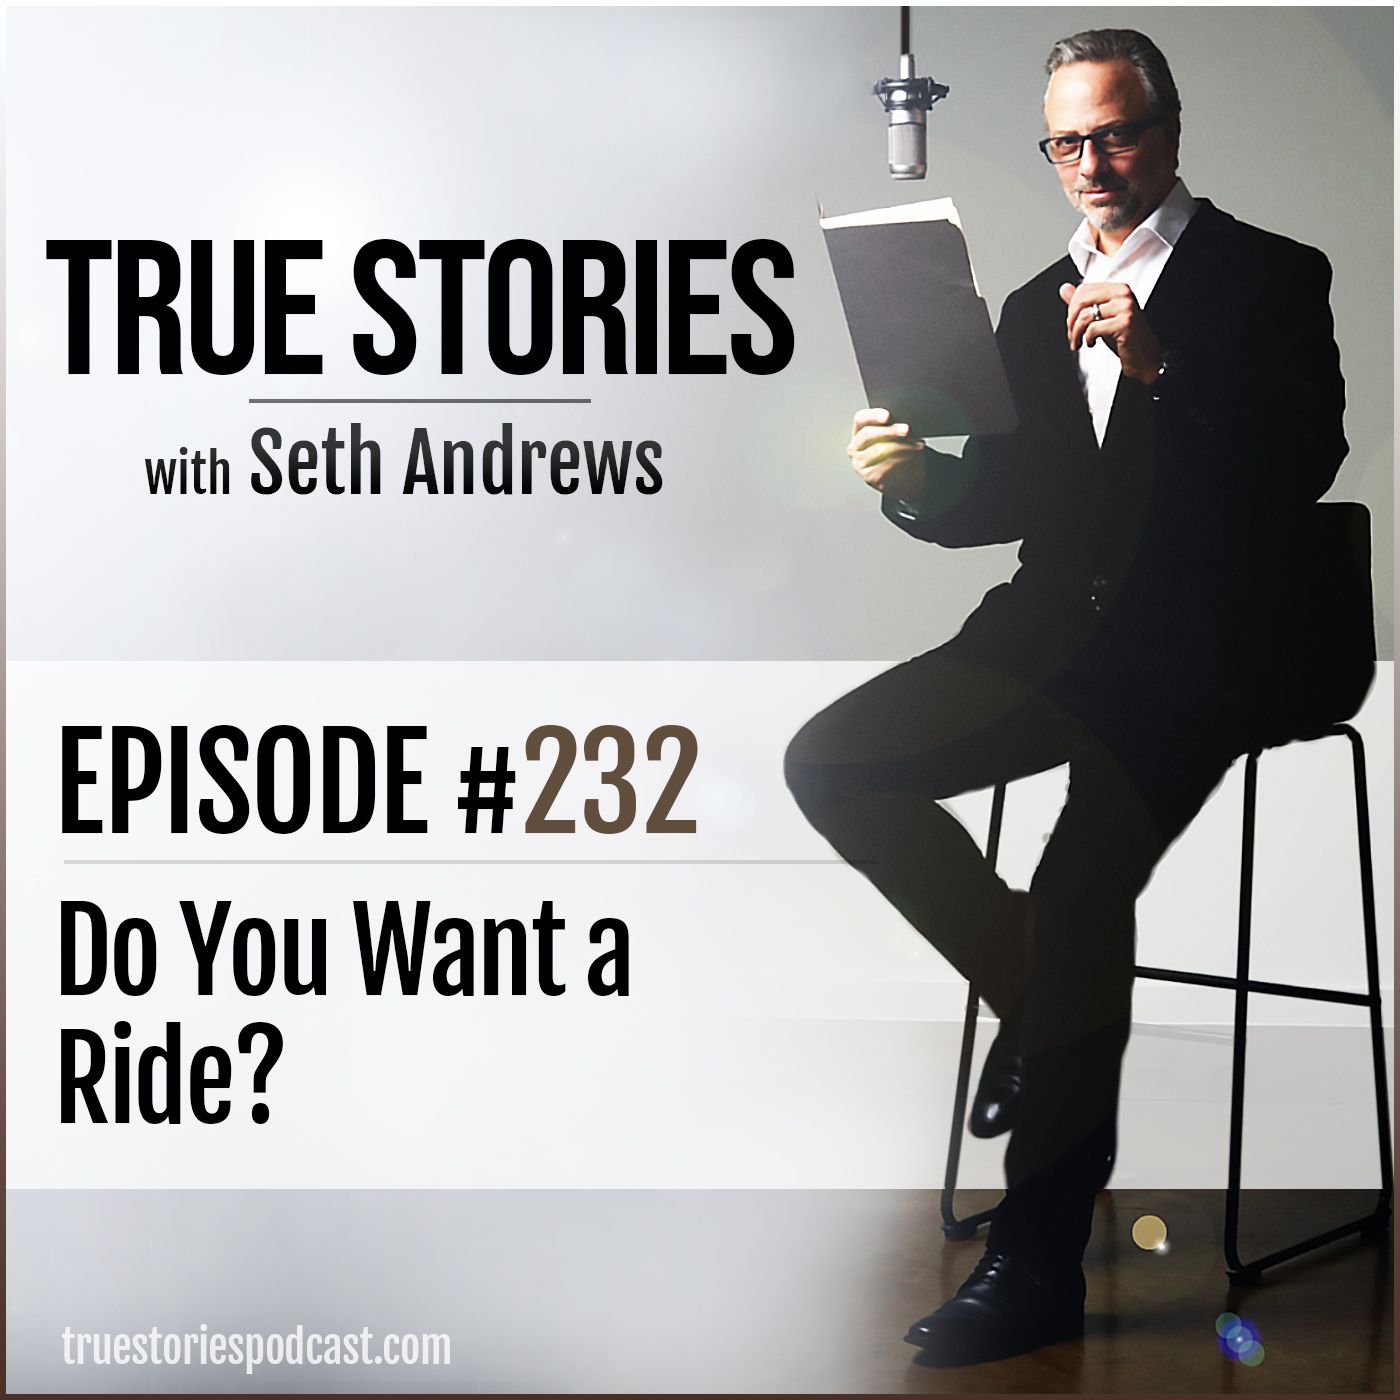 True Stories #232 - Do You Want a Ride?